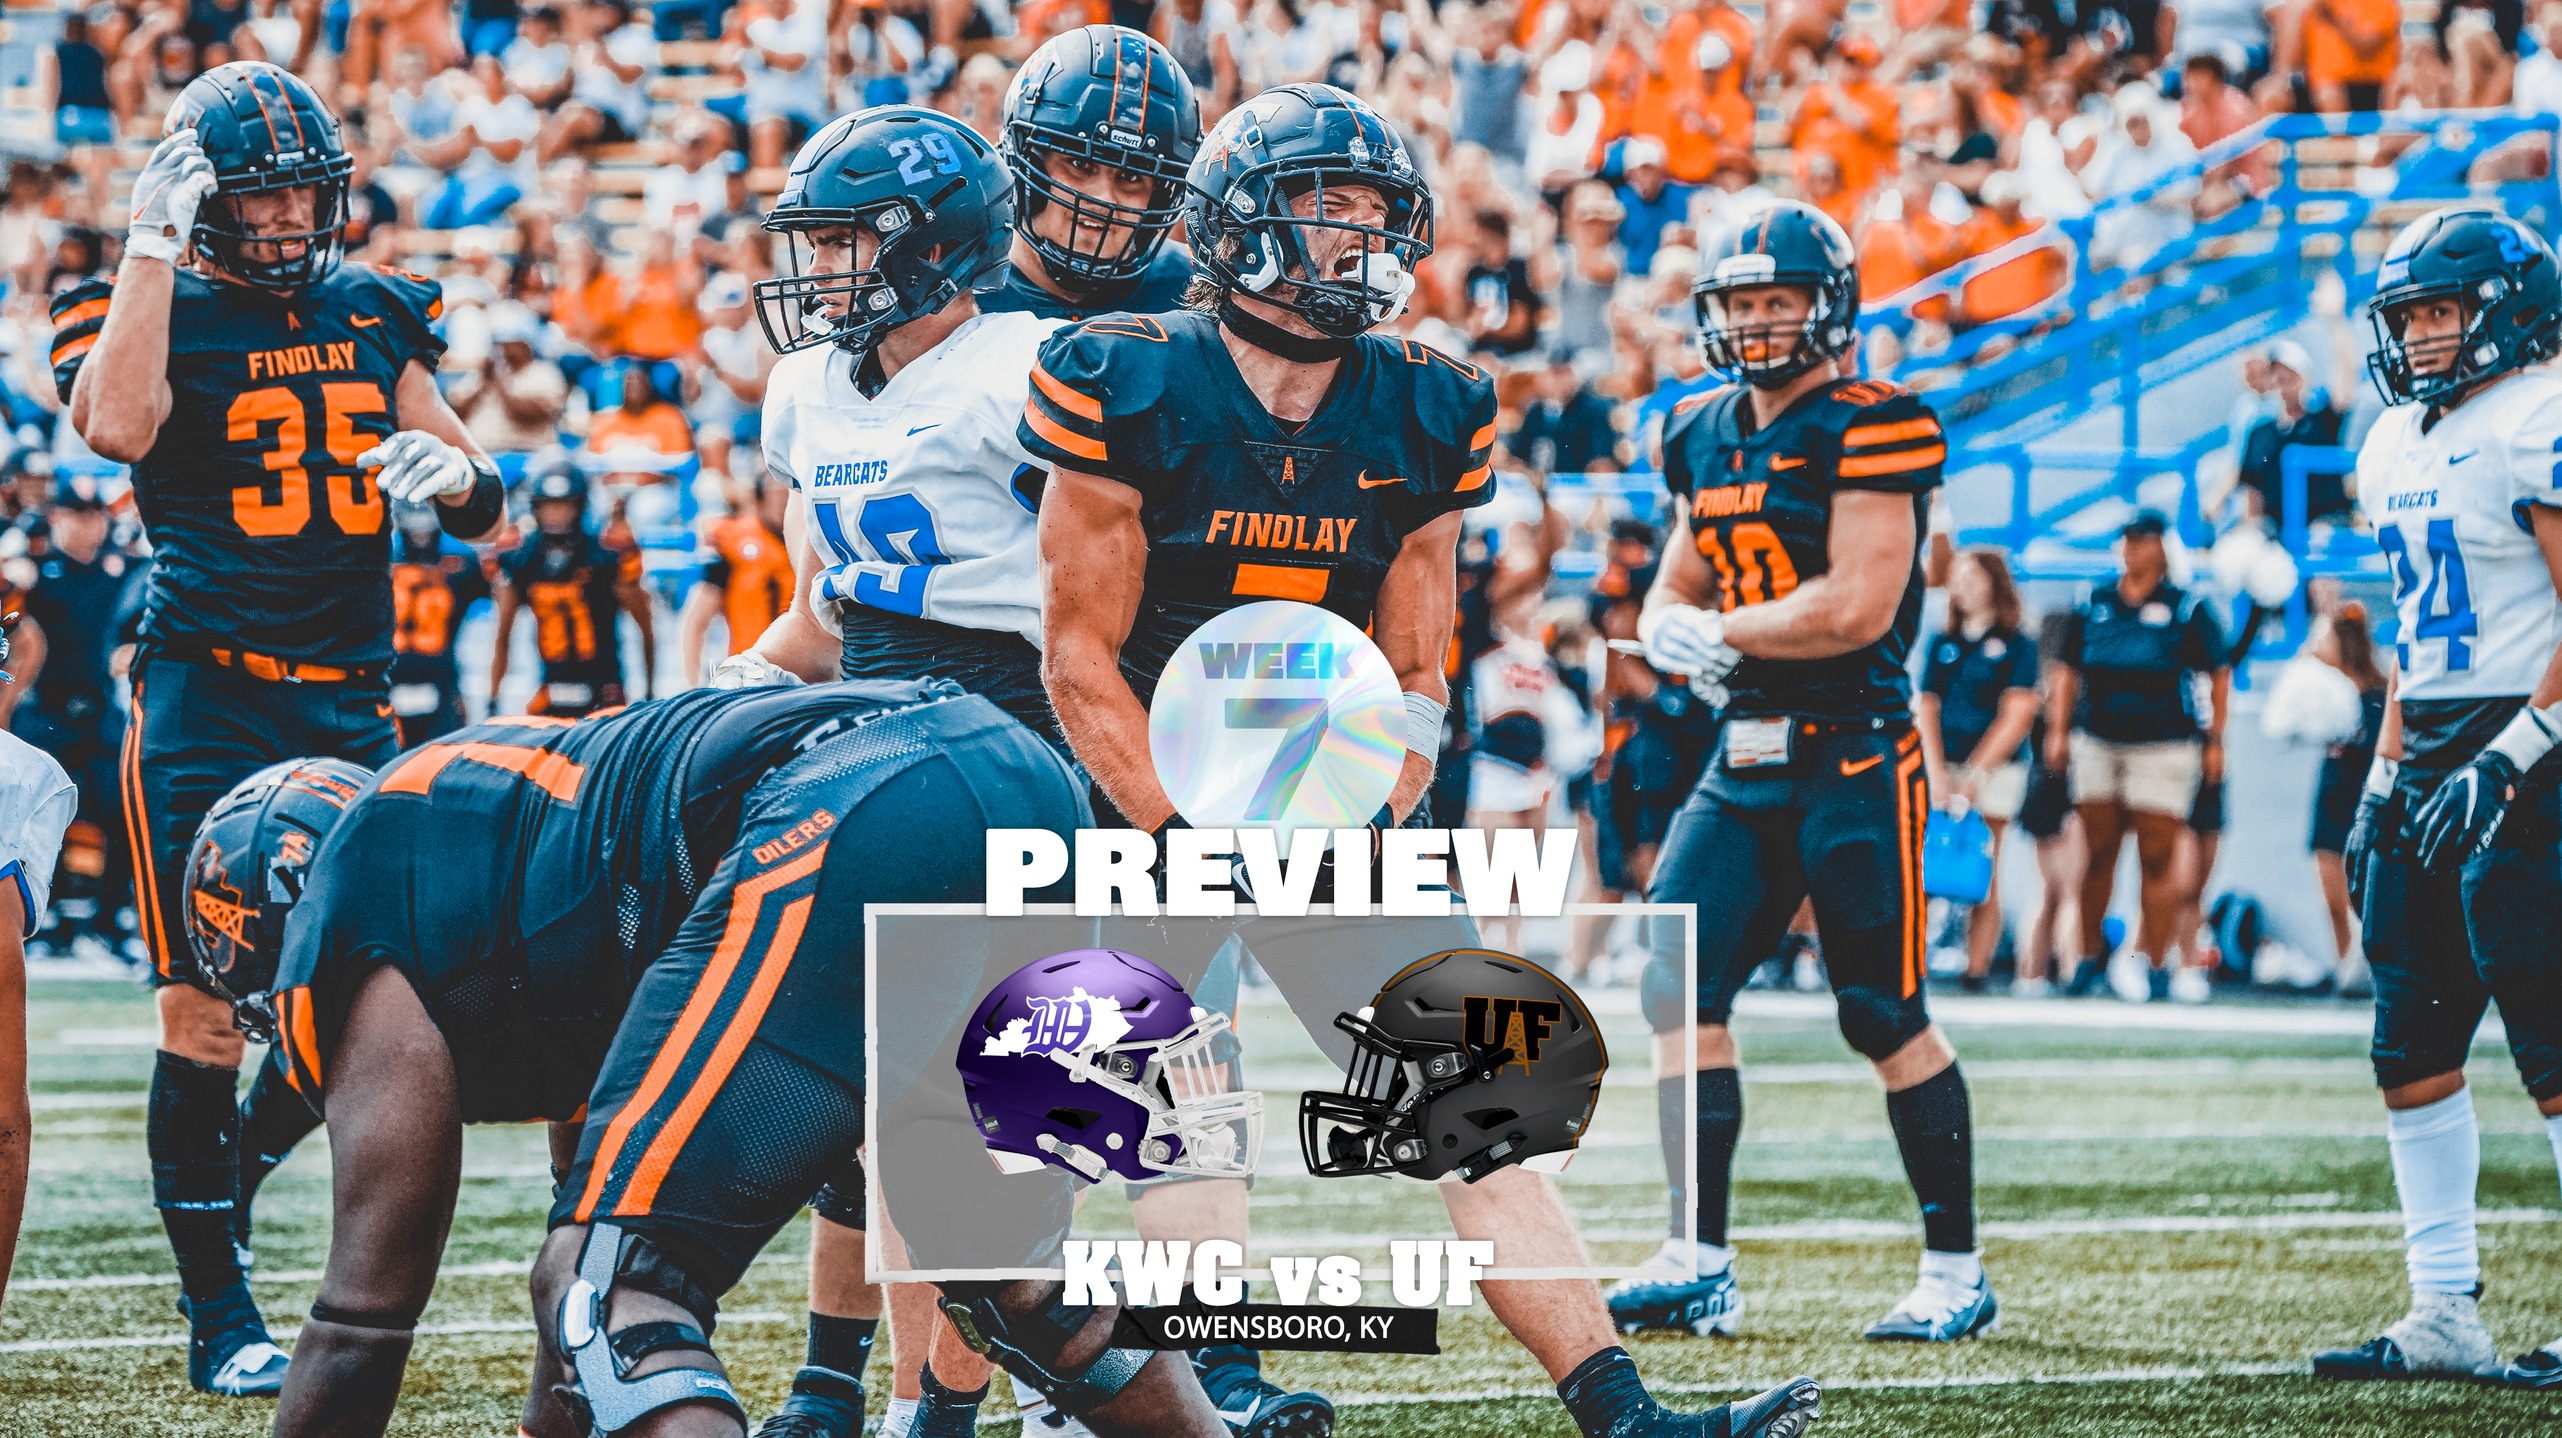 Week 7 Preview | Findlay Heads to Owensboro to Battle KWC